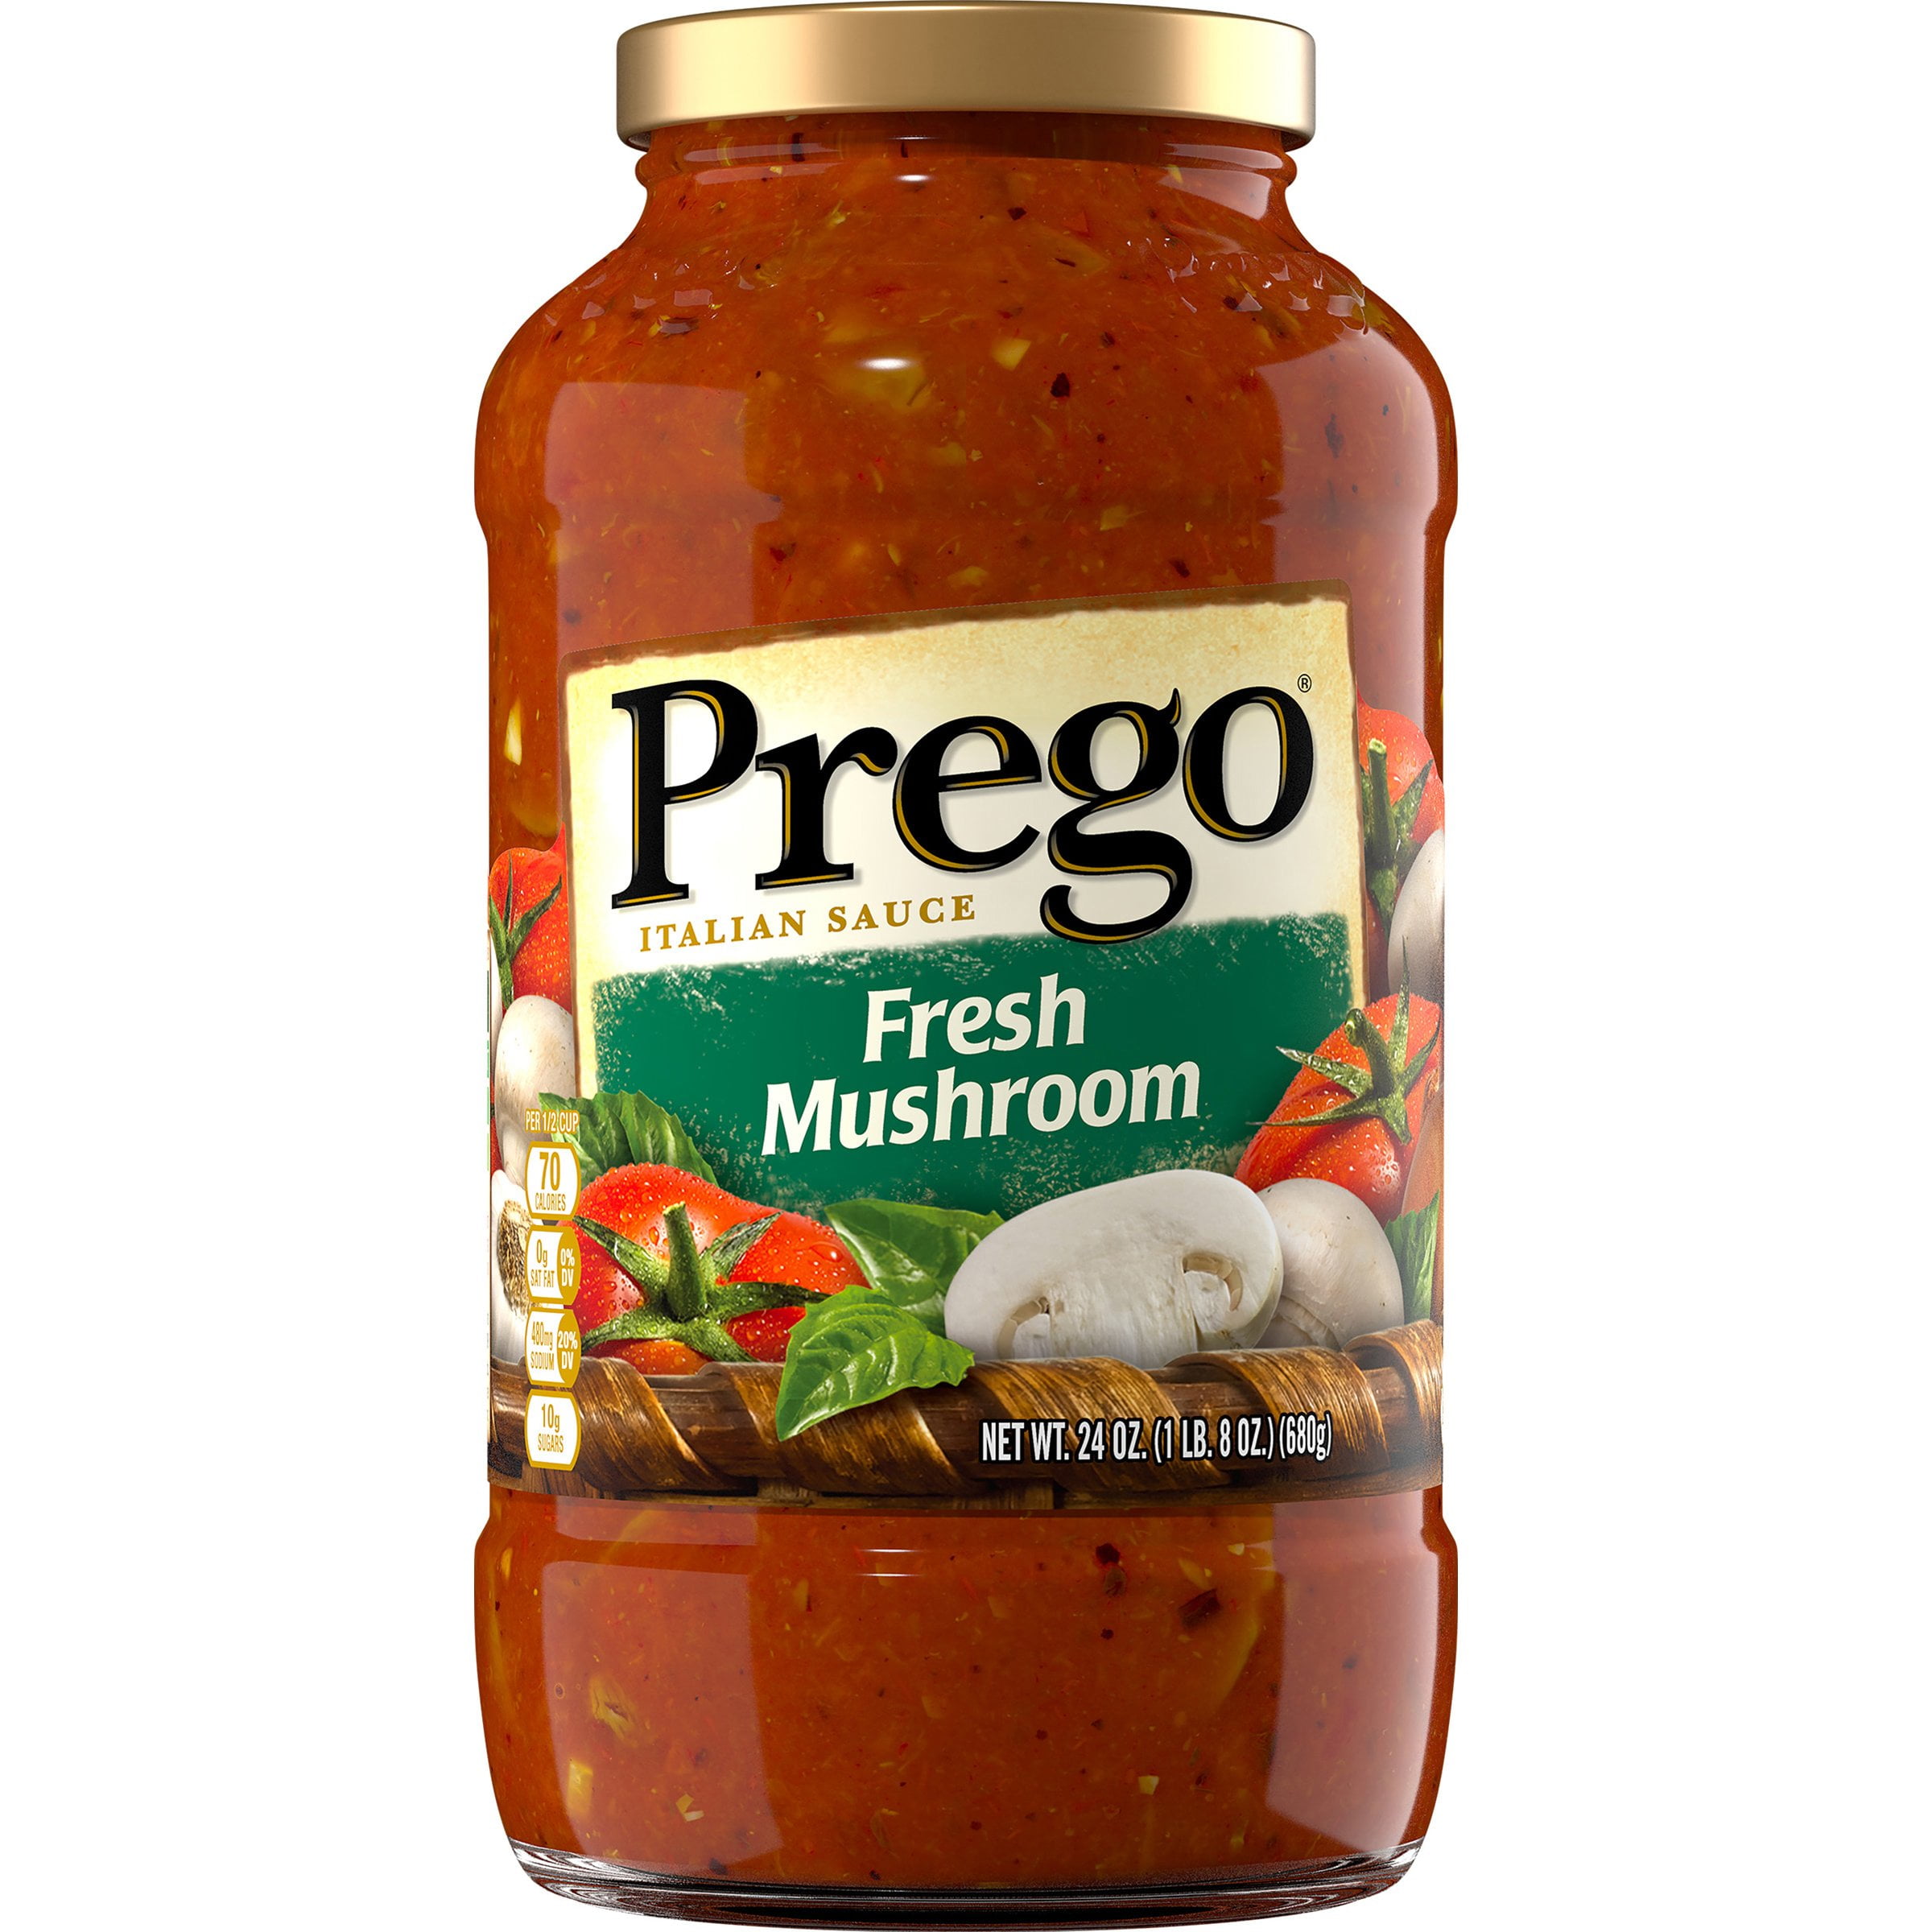  Prego Traditional Pasta Sauce, 45 Oz Jar (Pack of 3) : Grocery  & Gourmet Food